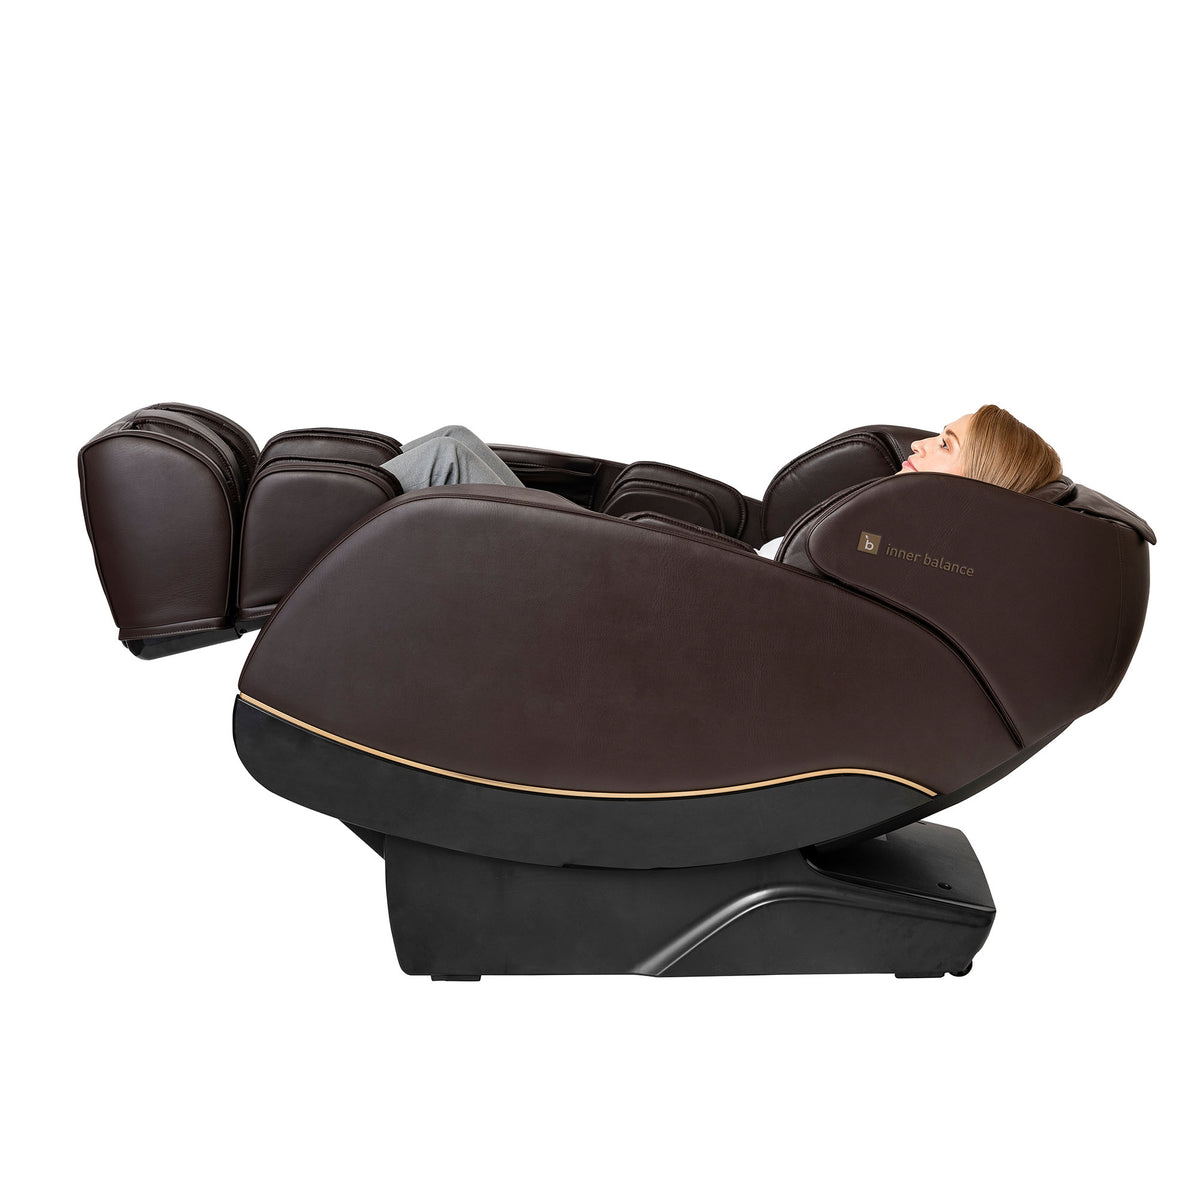 Woman enjoying a fully zero-gravity reclined Inner Balance Jin 2.0 Massage Chair upholstered in brown leather with gold trimmings